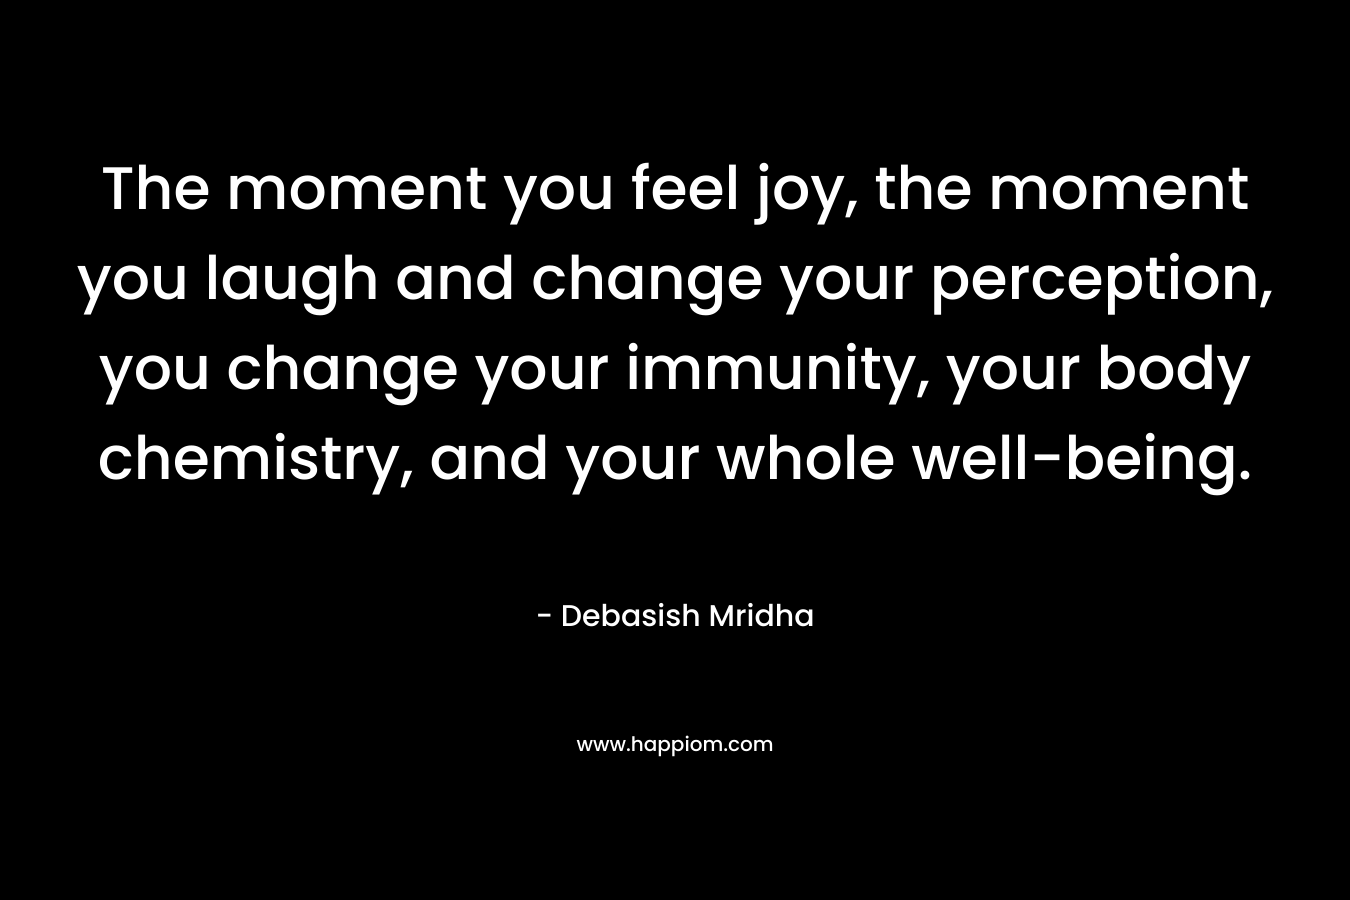 The moment you feel joy, the moment you laugh and change your perception, you change your immunity, your body chemistry, and your whole well-being.